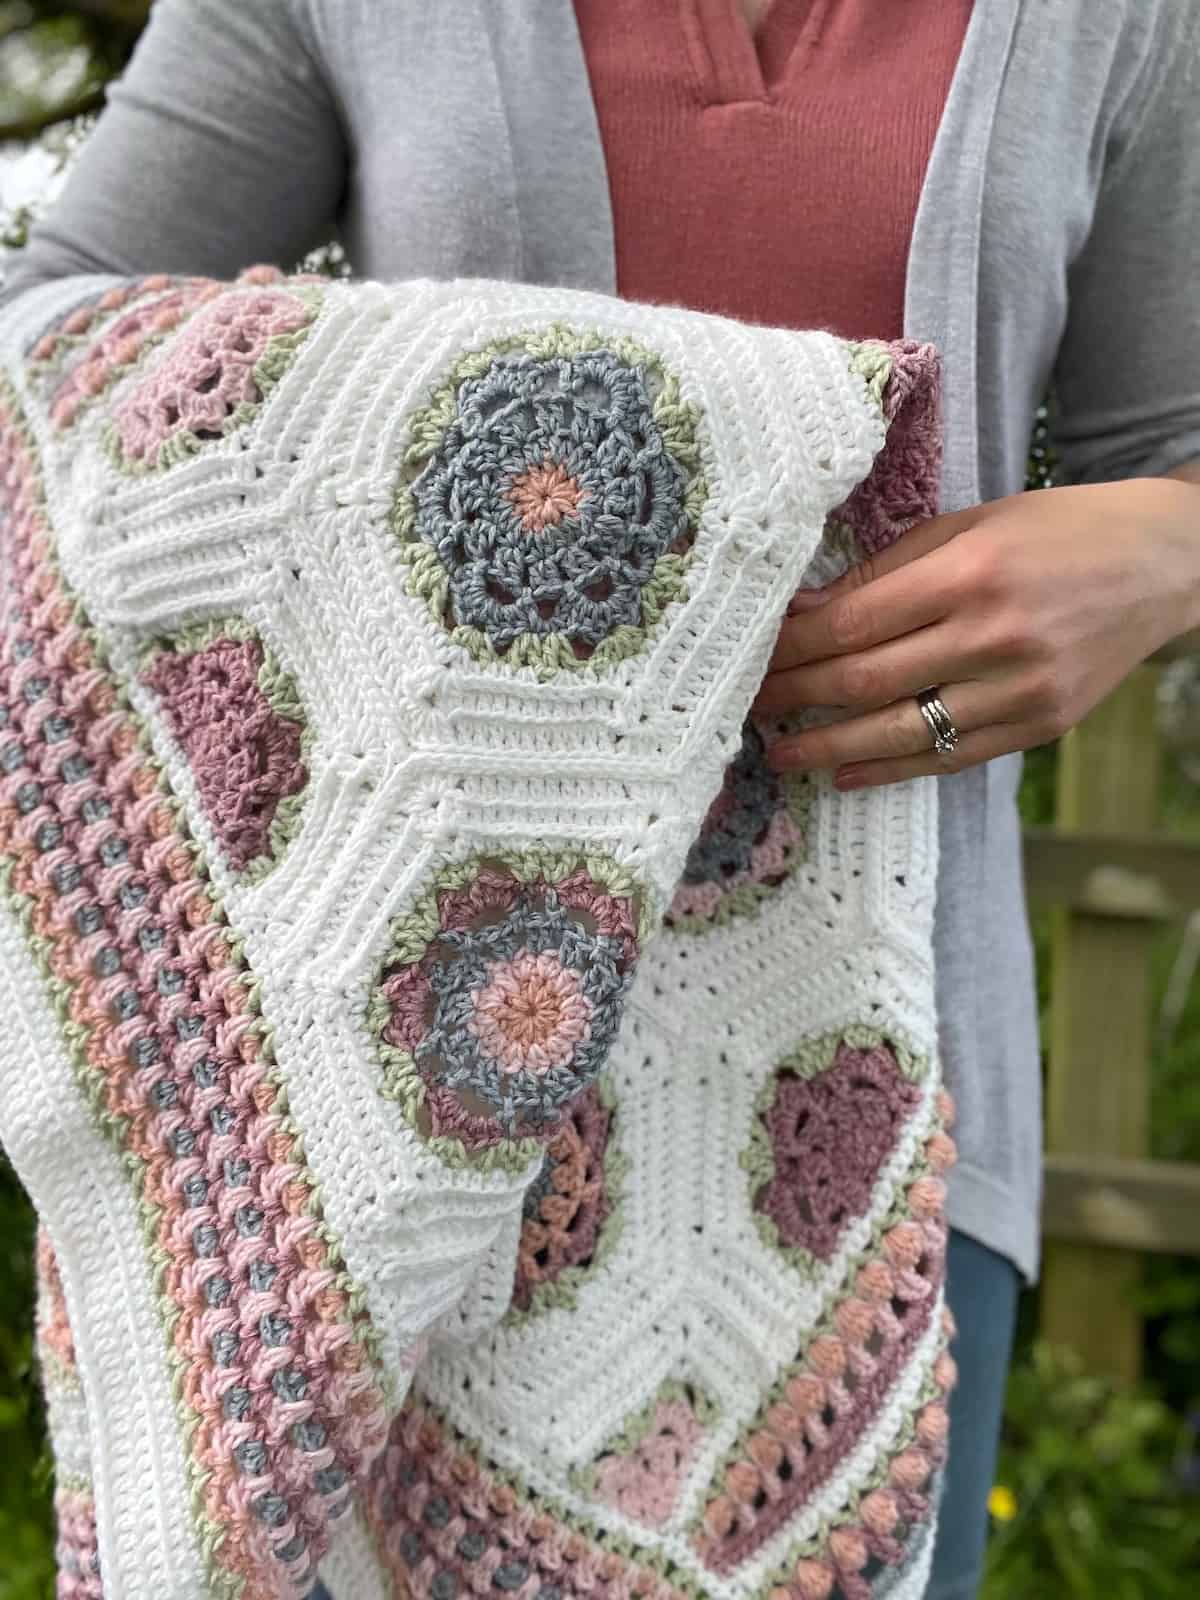 Pretty crochet blanket draped over someones arm in pastel colours.